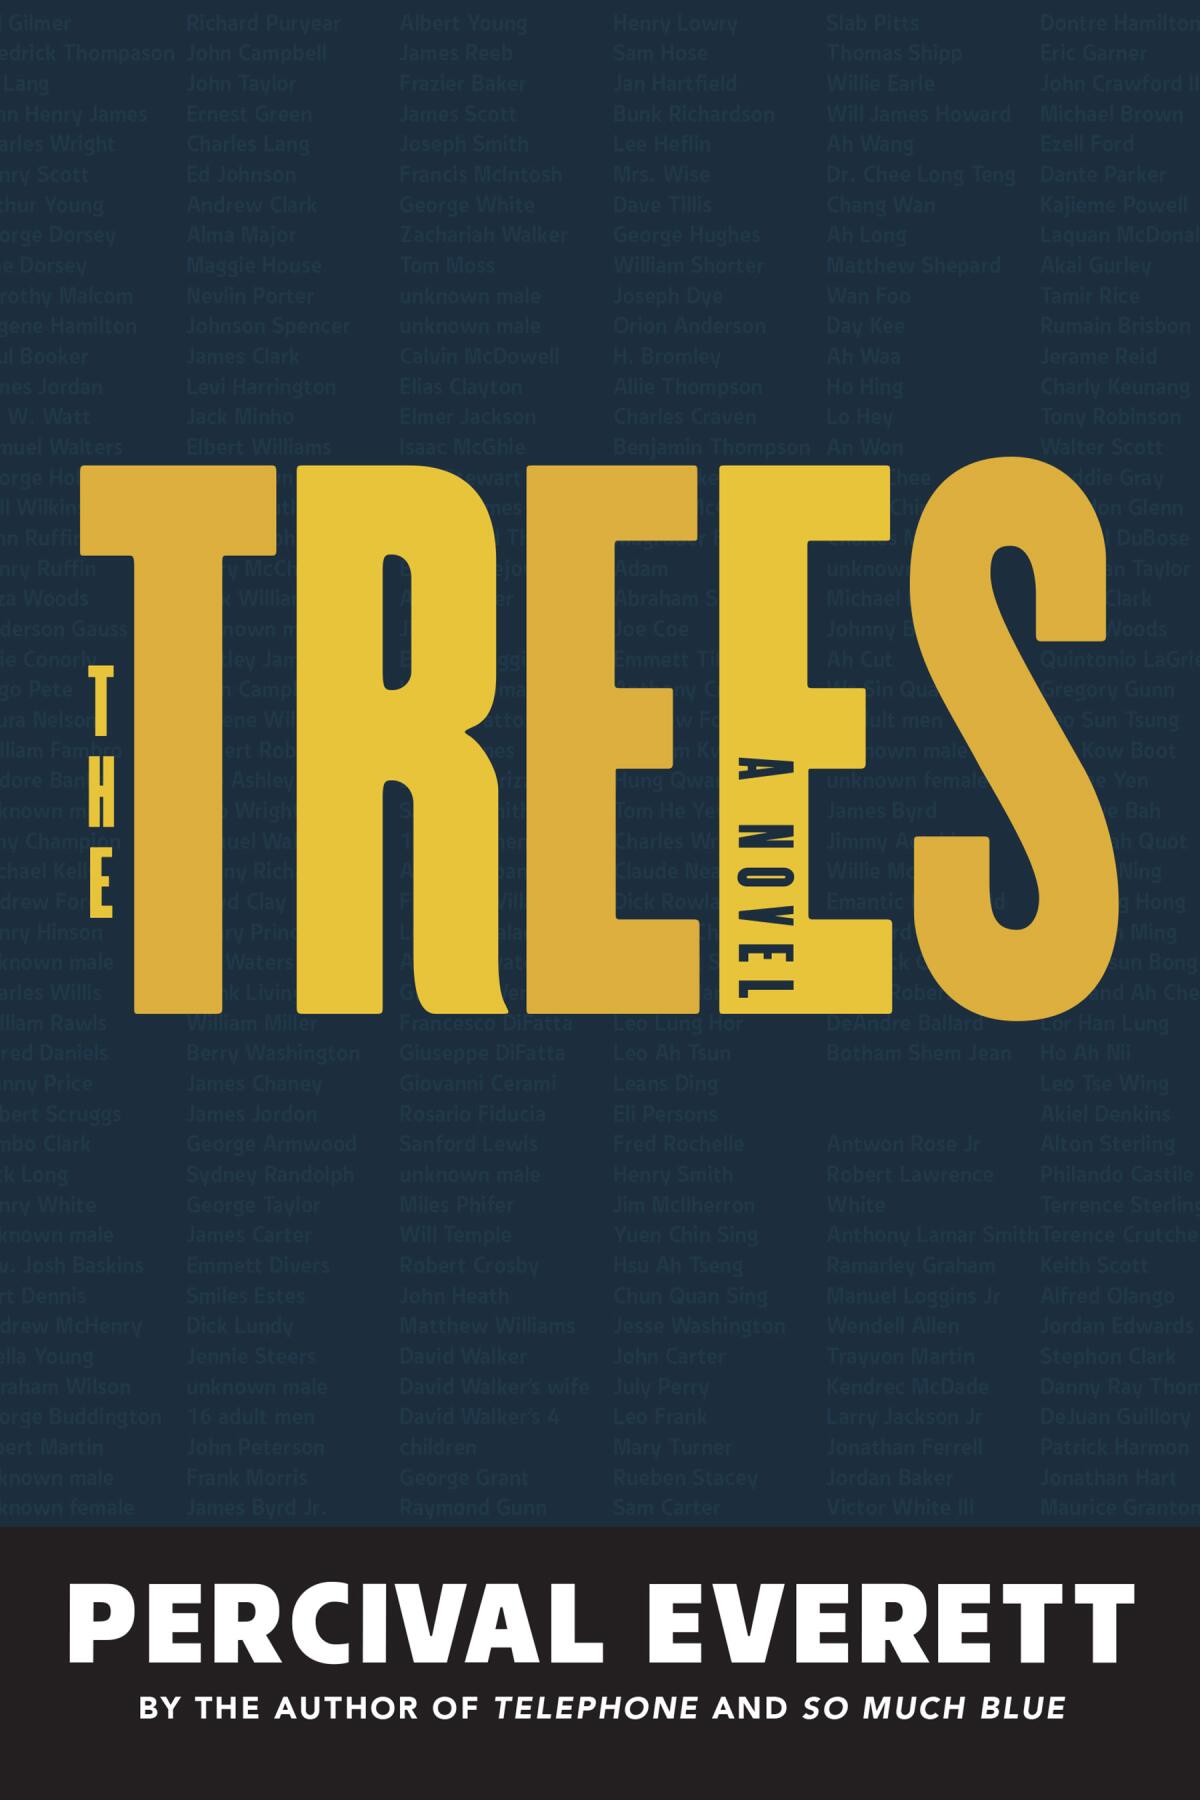 "The Trees," by Percival Everett